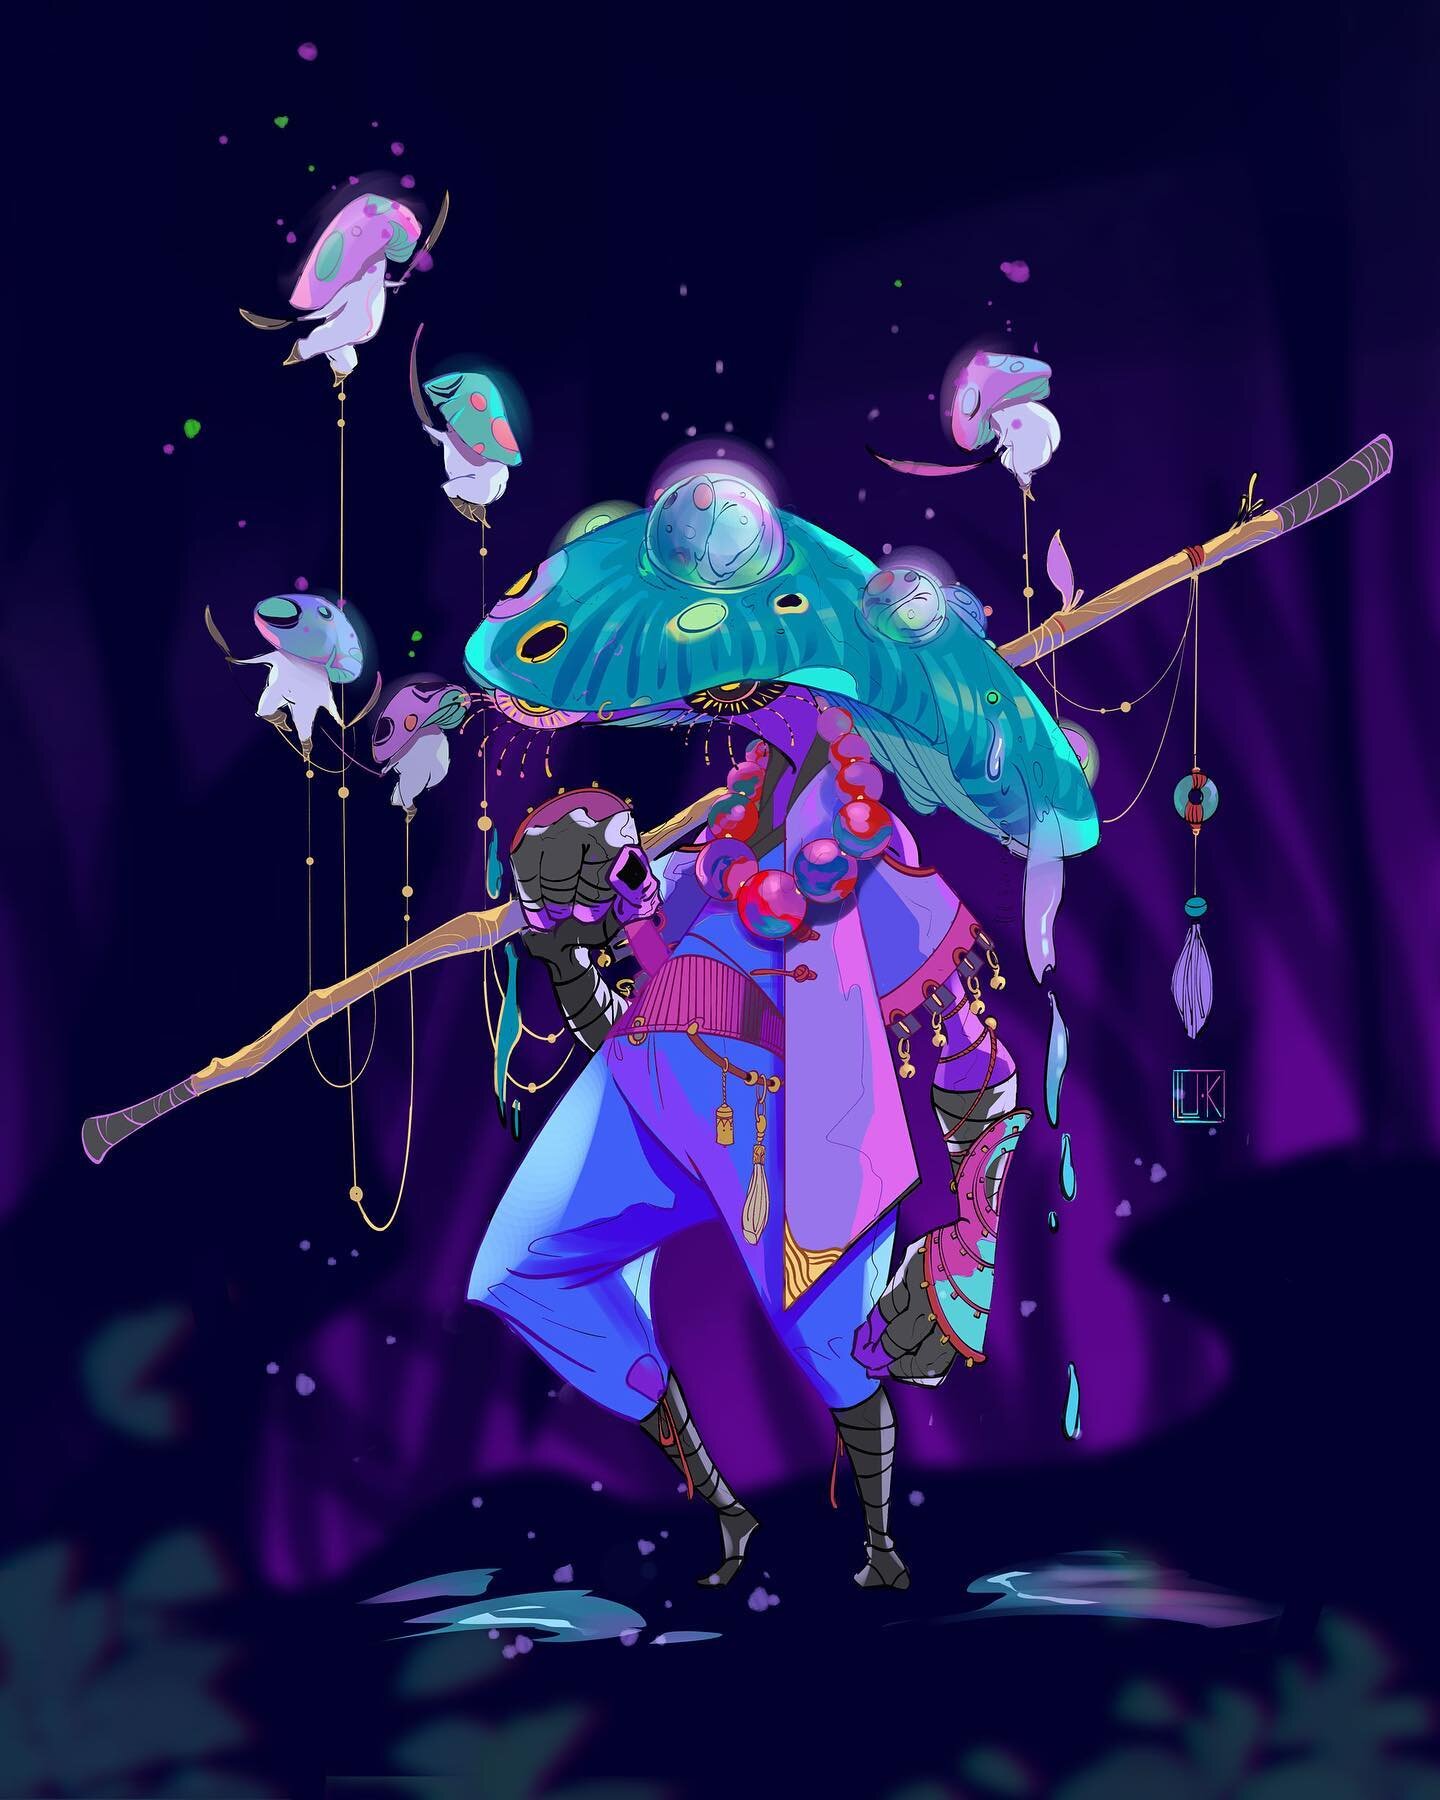 There is something a bit different :) #mushroomfighter for my #cdchallenge 💜💜

He is a strong kung fu master with some little mushroom baby helpers. Those little ones do not have much damage power but can release poison gas which slow down or somet